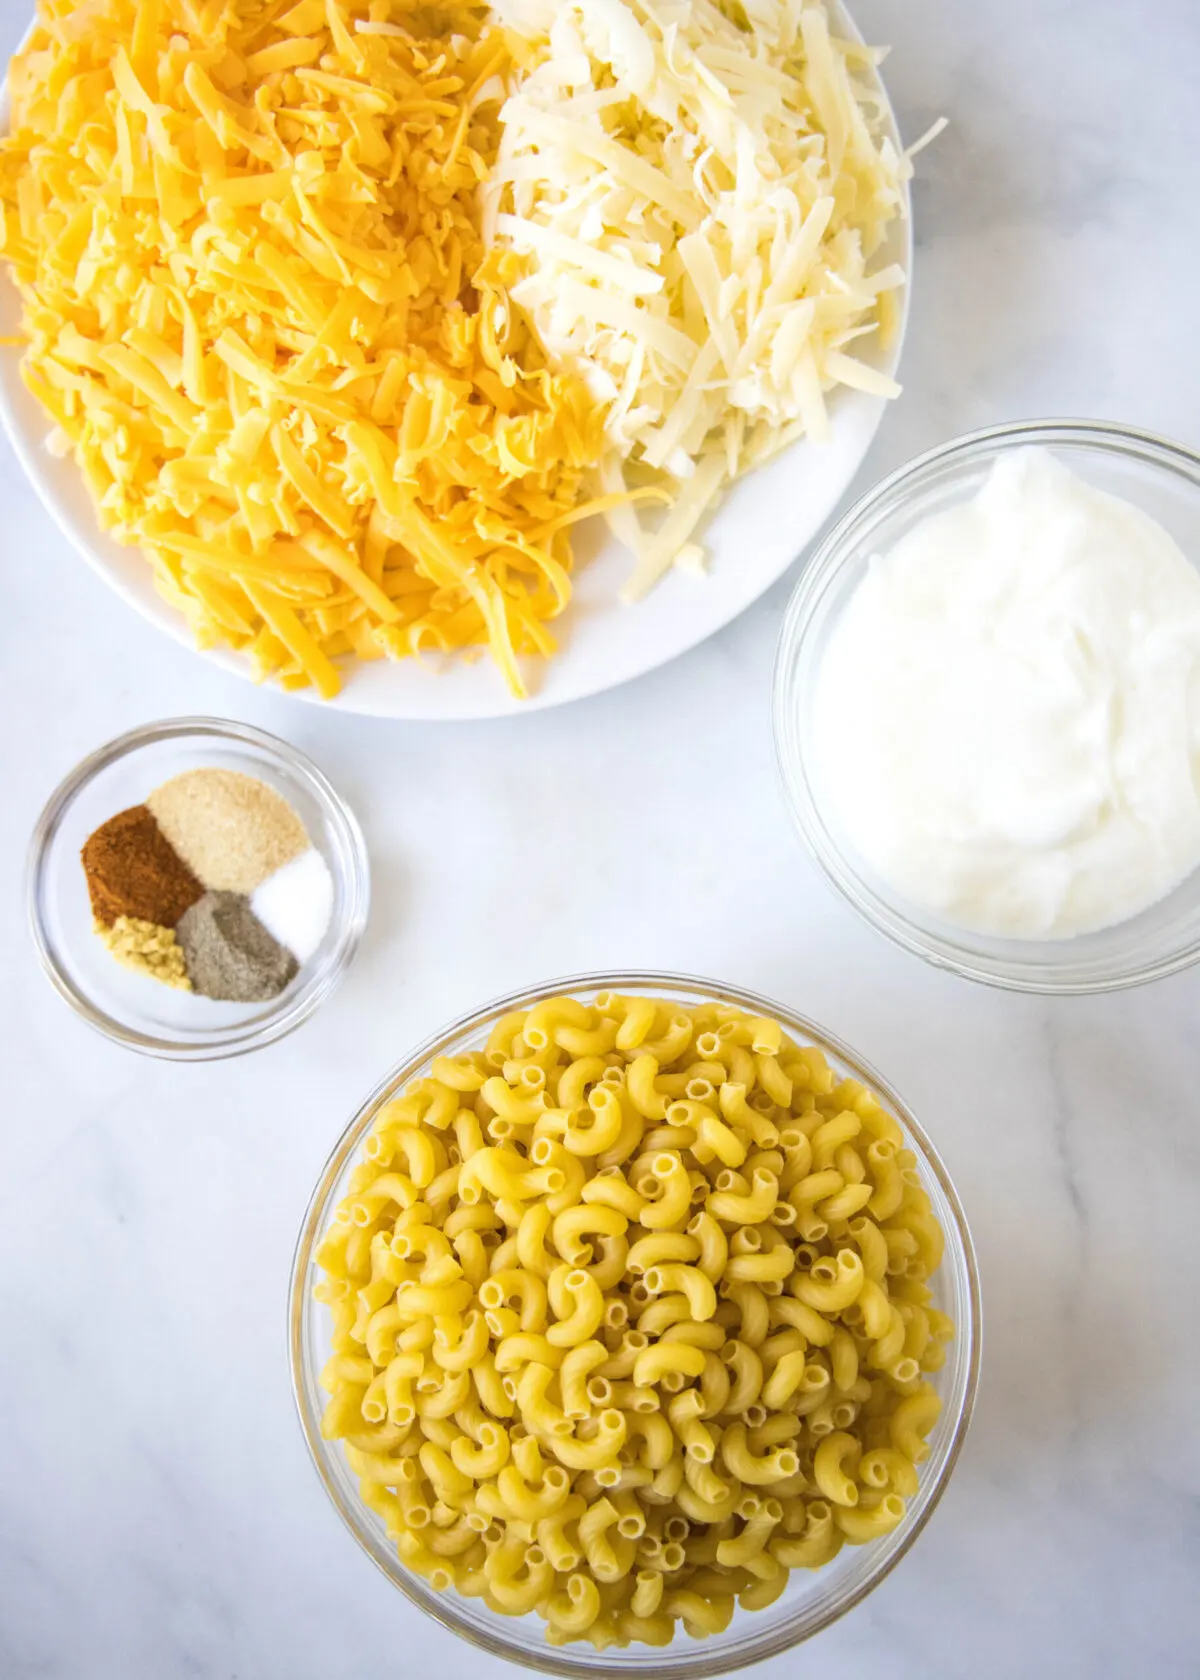 Overhead view of the ingredients needed for healthy mac and cheese: a bowl of elbow macaroni, a bowl of shredded gruyere and cheddar cheeses, a bowl of Greek yogurt, and a bowl of garlic powder, ground mustard, paprika, pepper, and salt